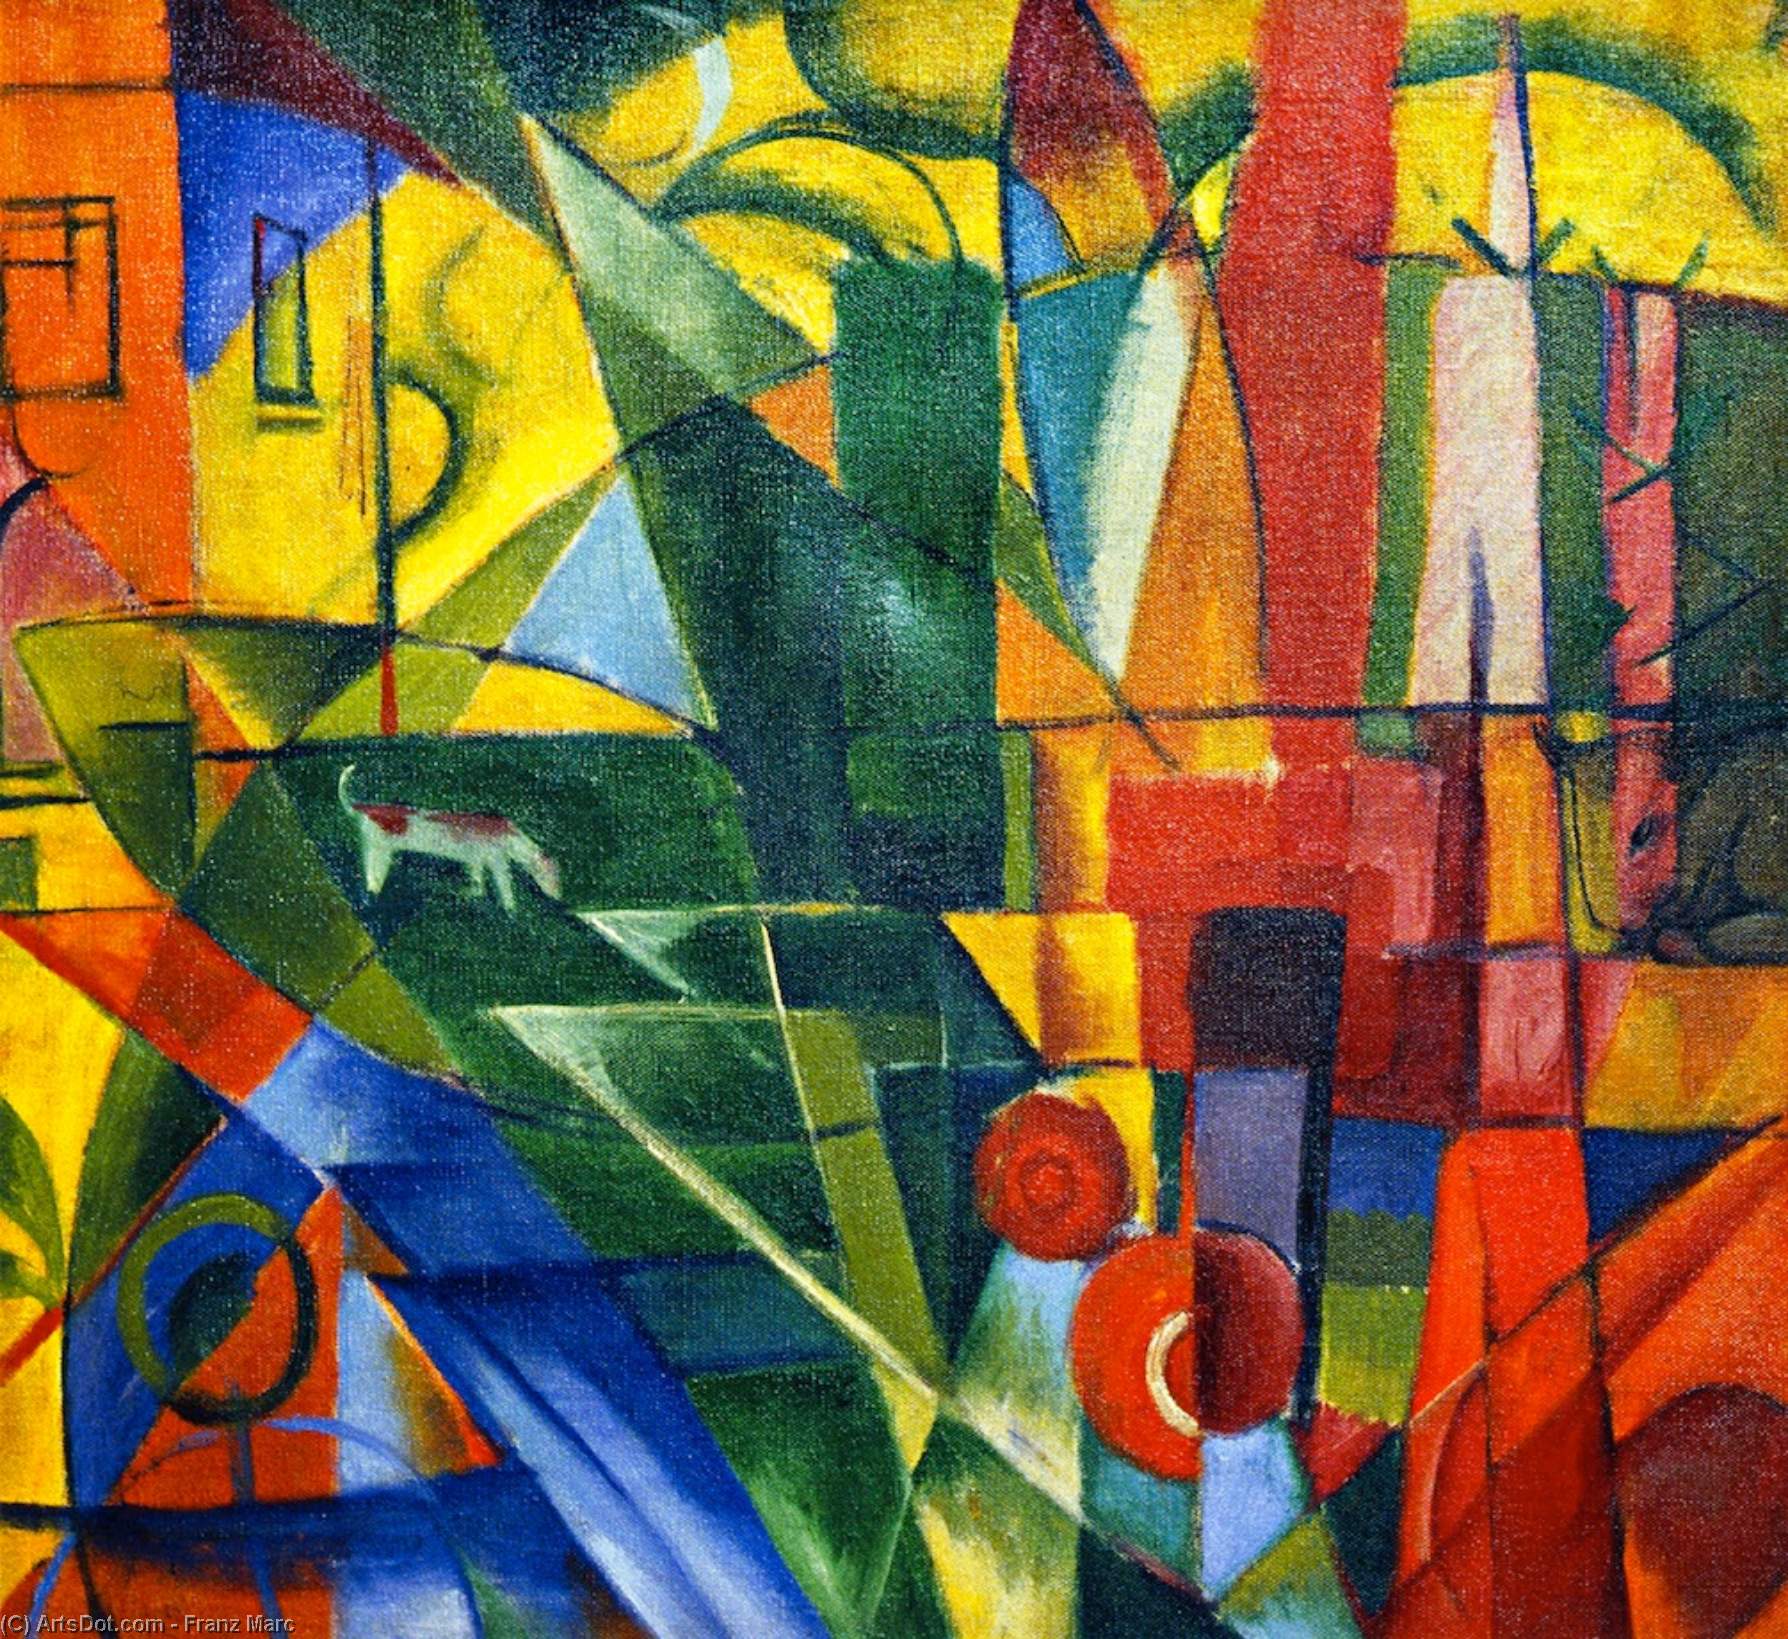 WikiOO.org - 백과 사전 - 회화, 삽화 Franz Marc - Landscape with House and Two Cows (also known as Landscape with House, Dog and Cattle)